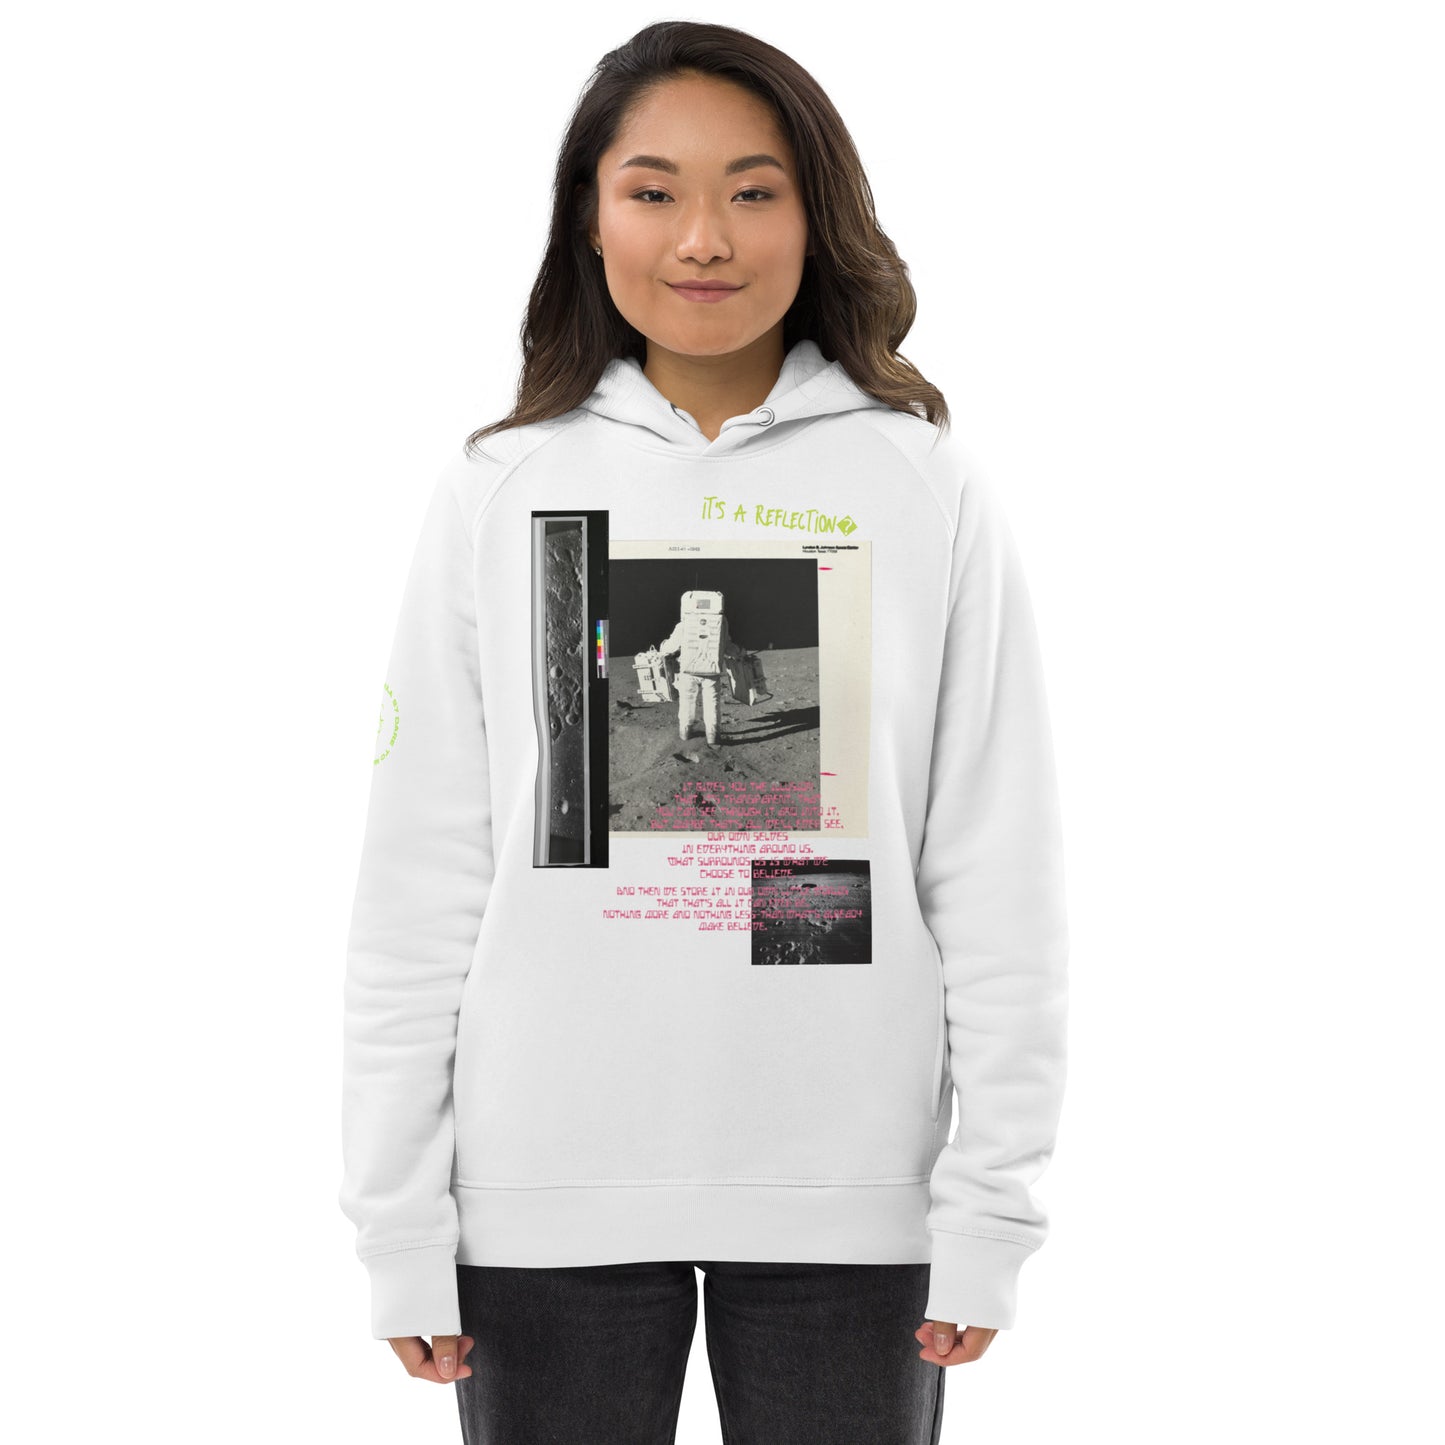 Reflection of Self, Man on the Moon Unisex Pullover Hoodie